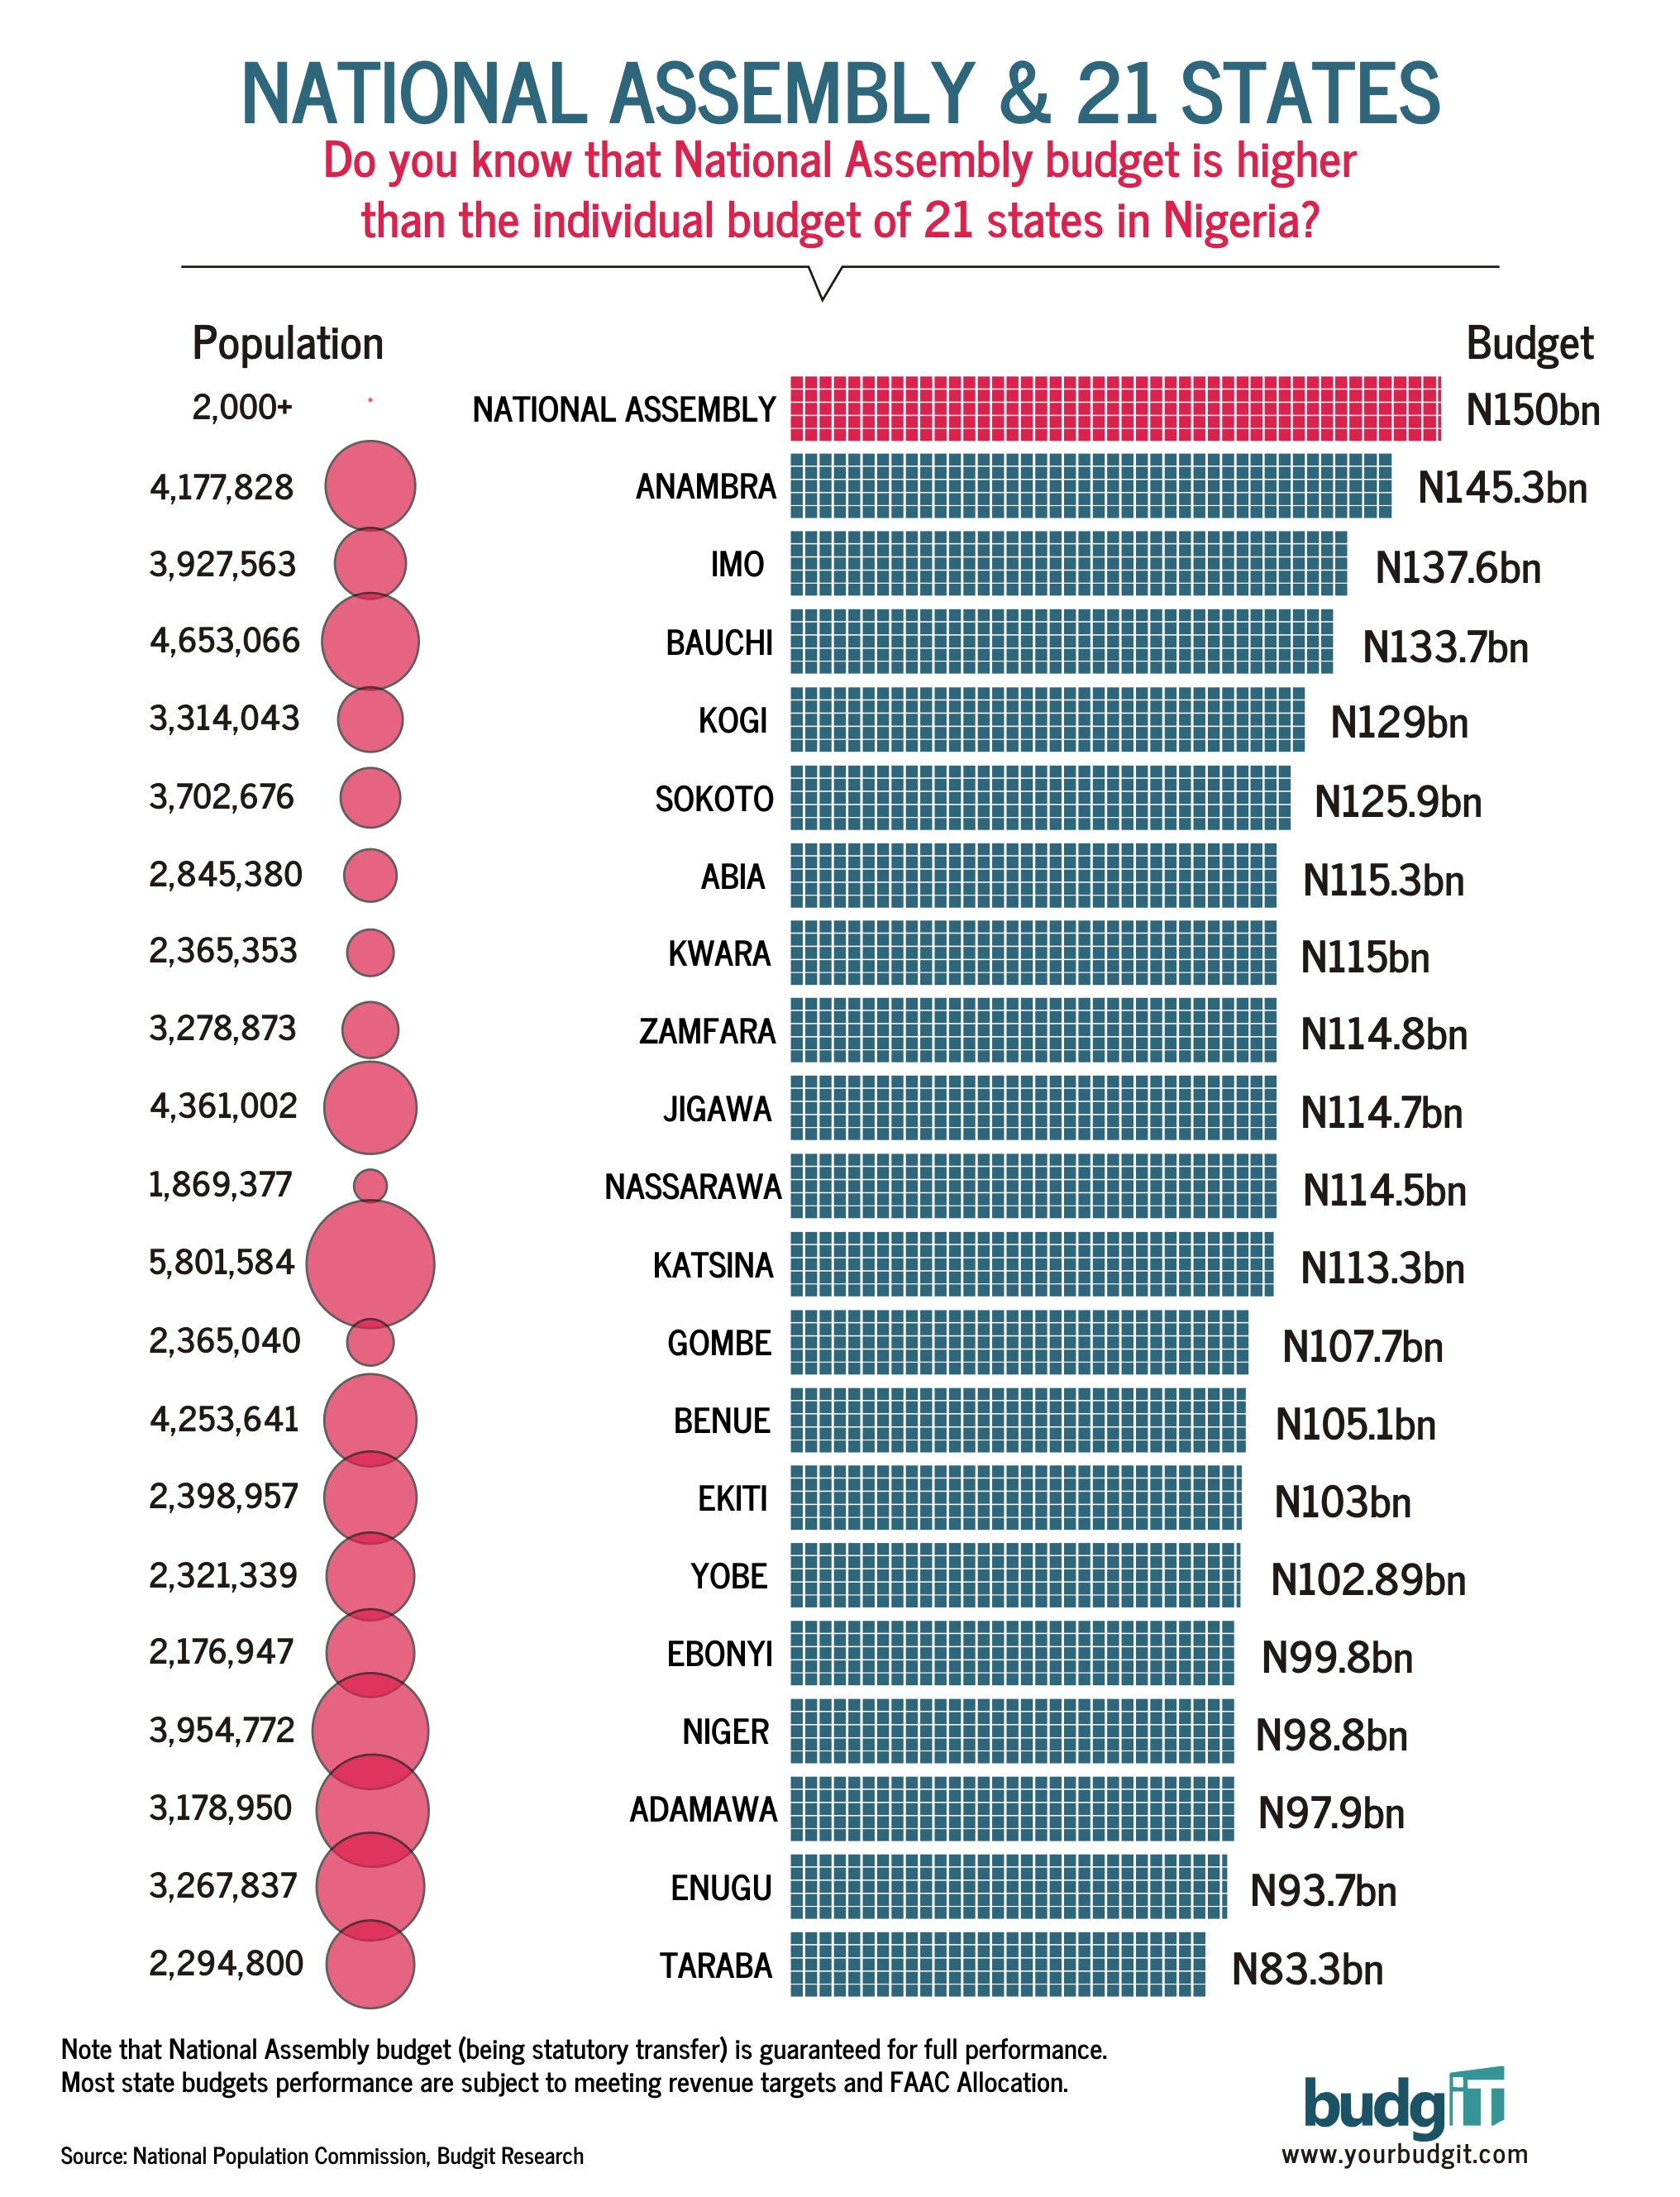 An Infographic on how the National Assembly Budget compares to State Budgets